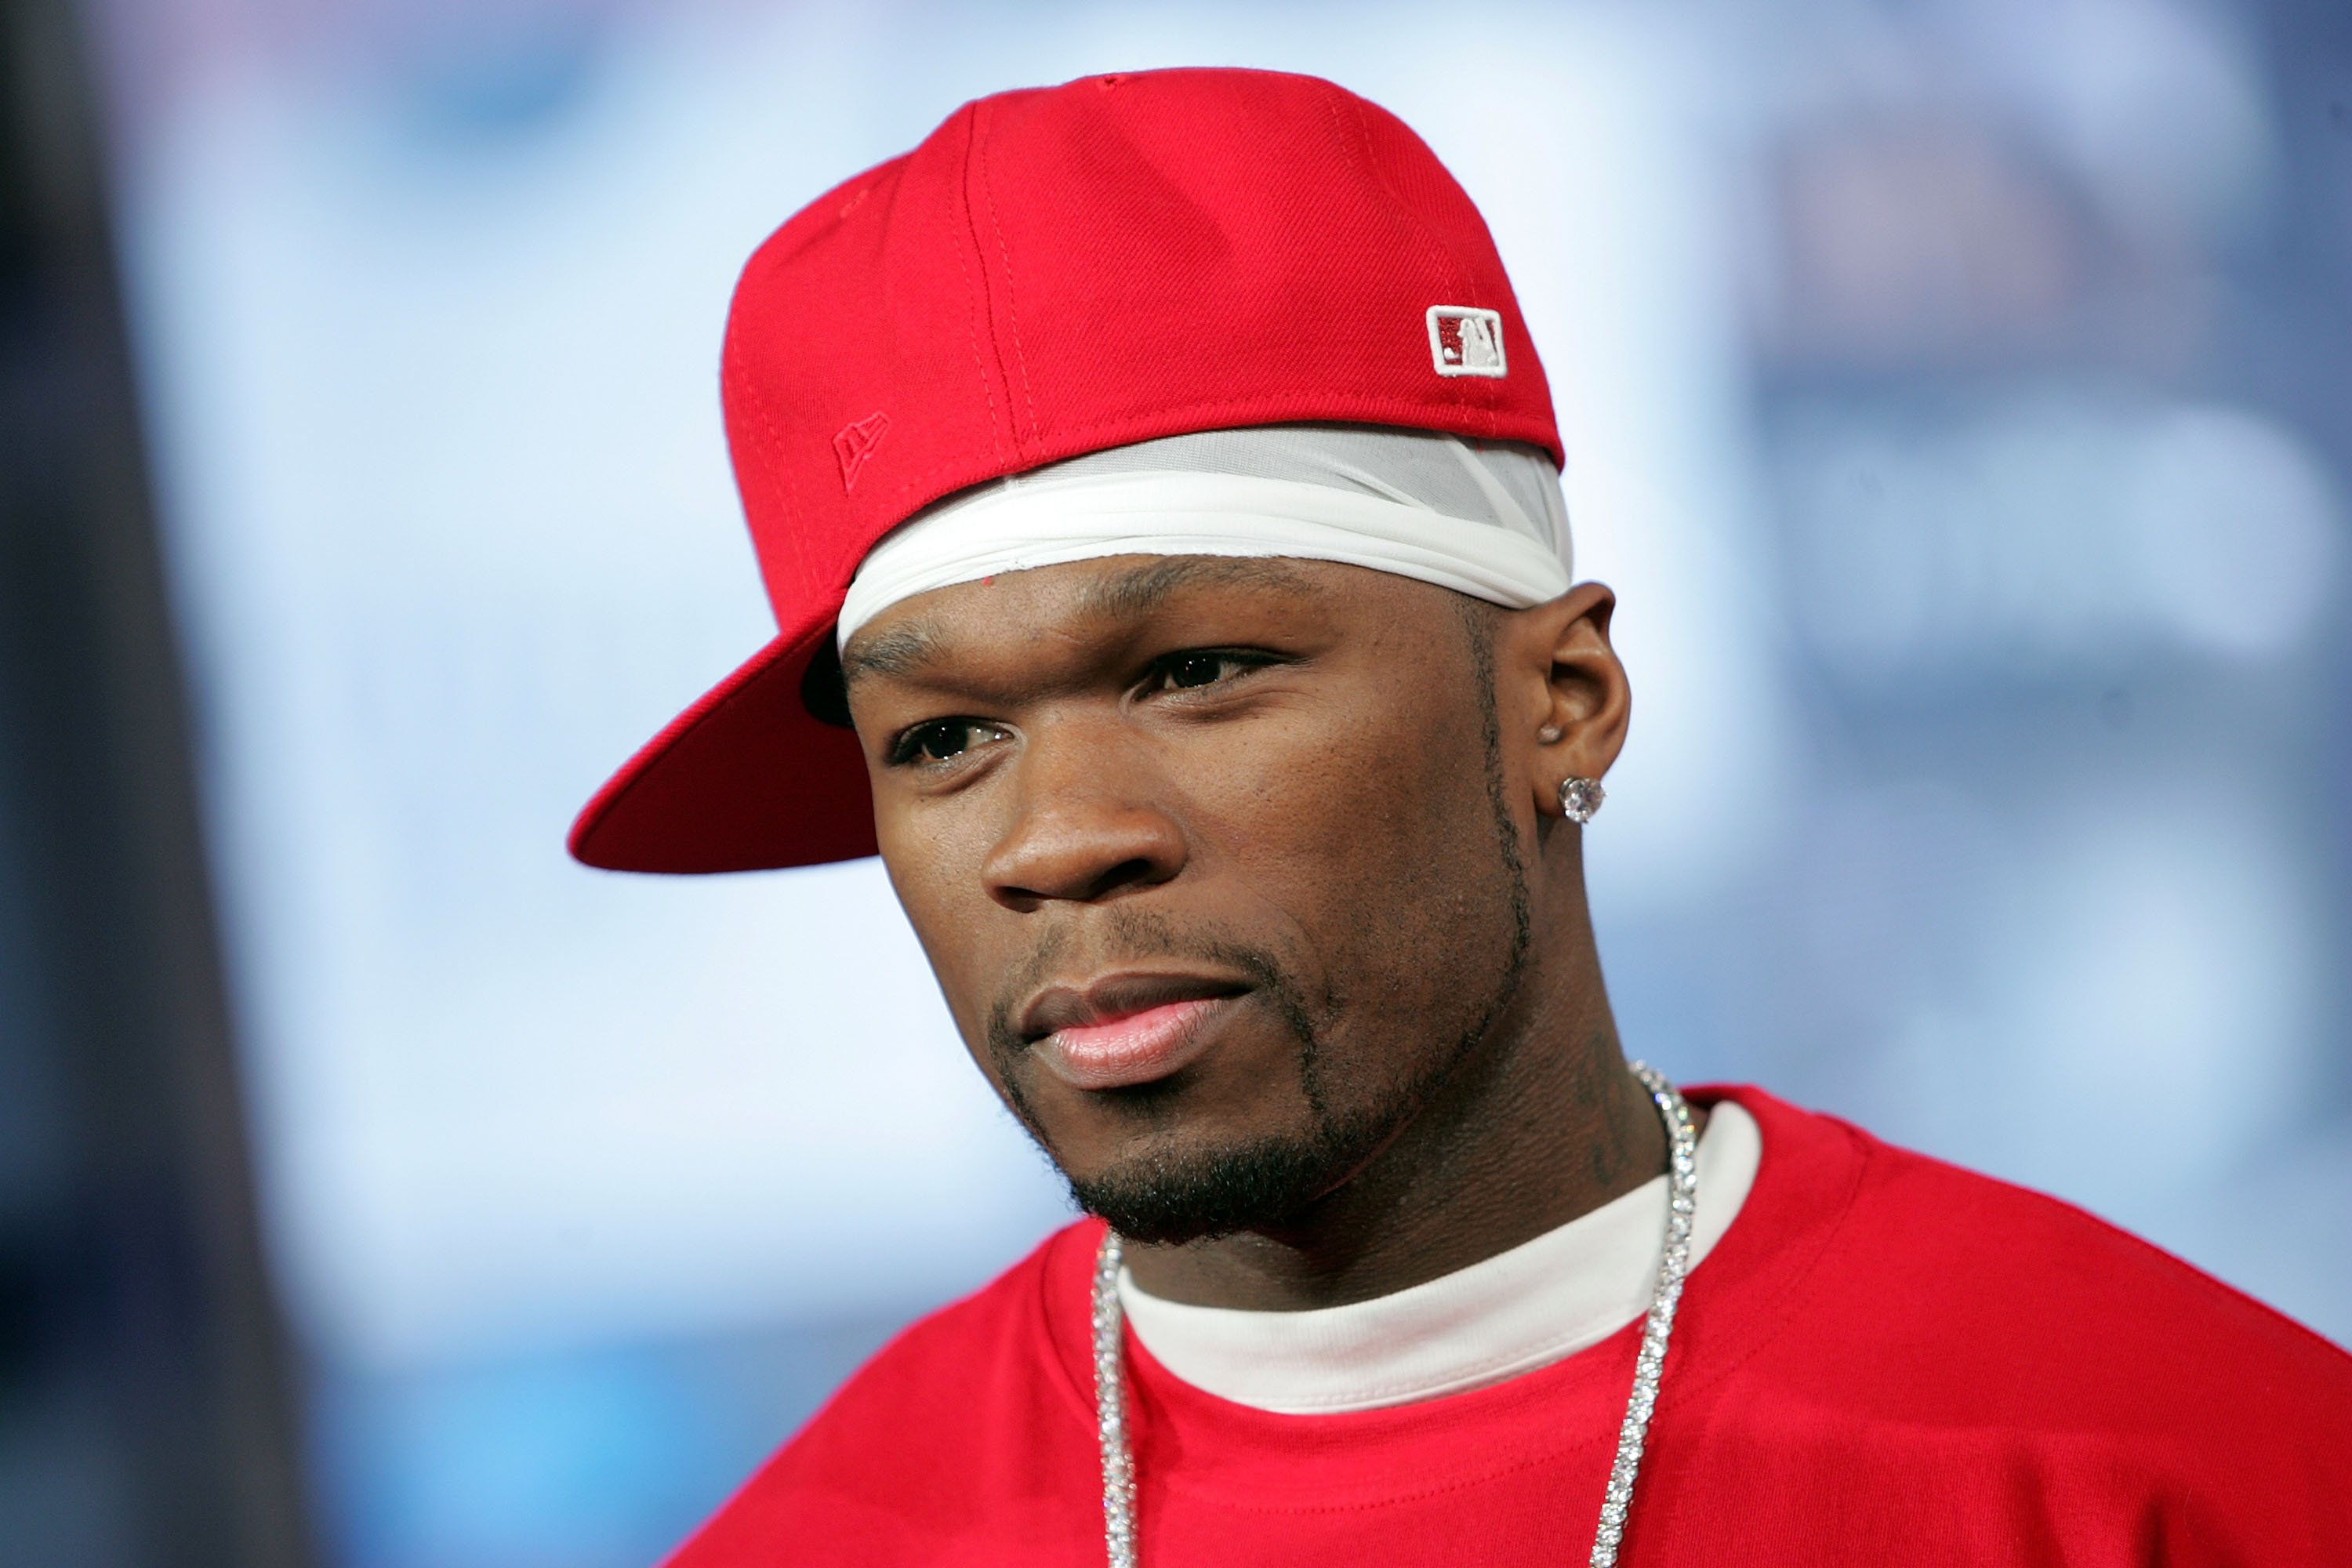 50 Cent in a red hat